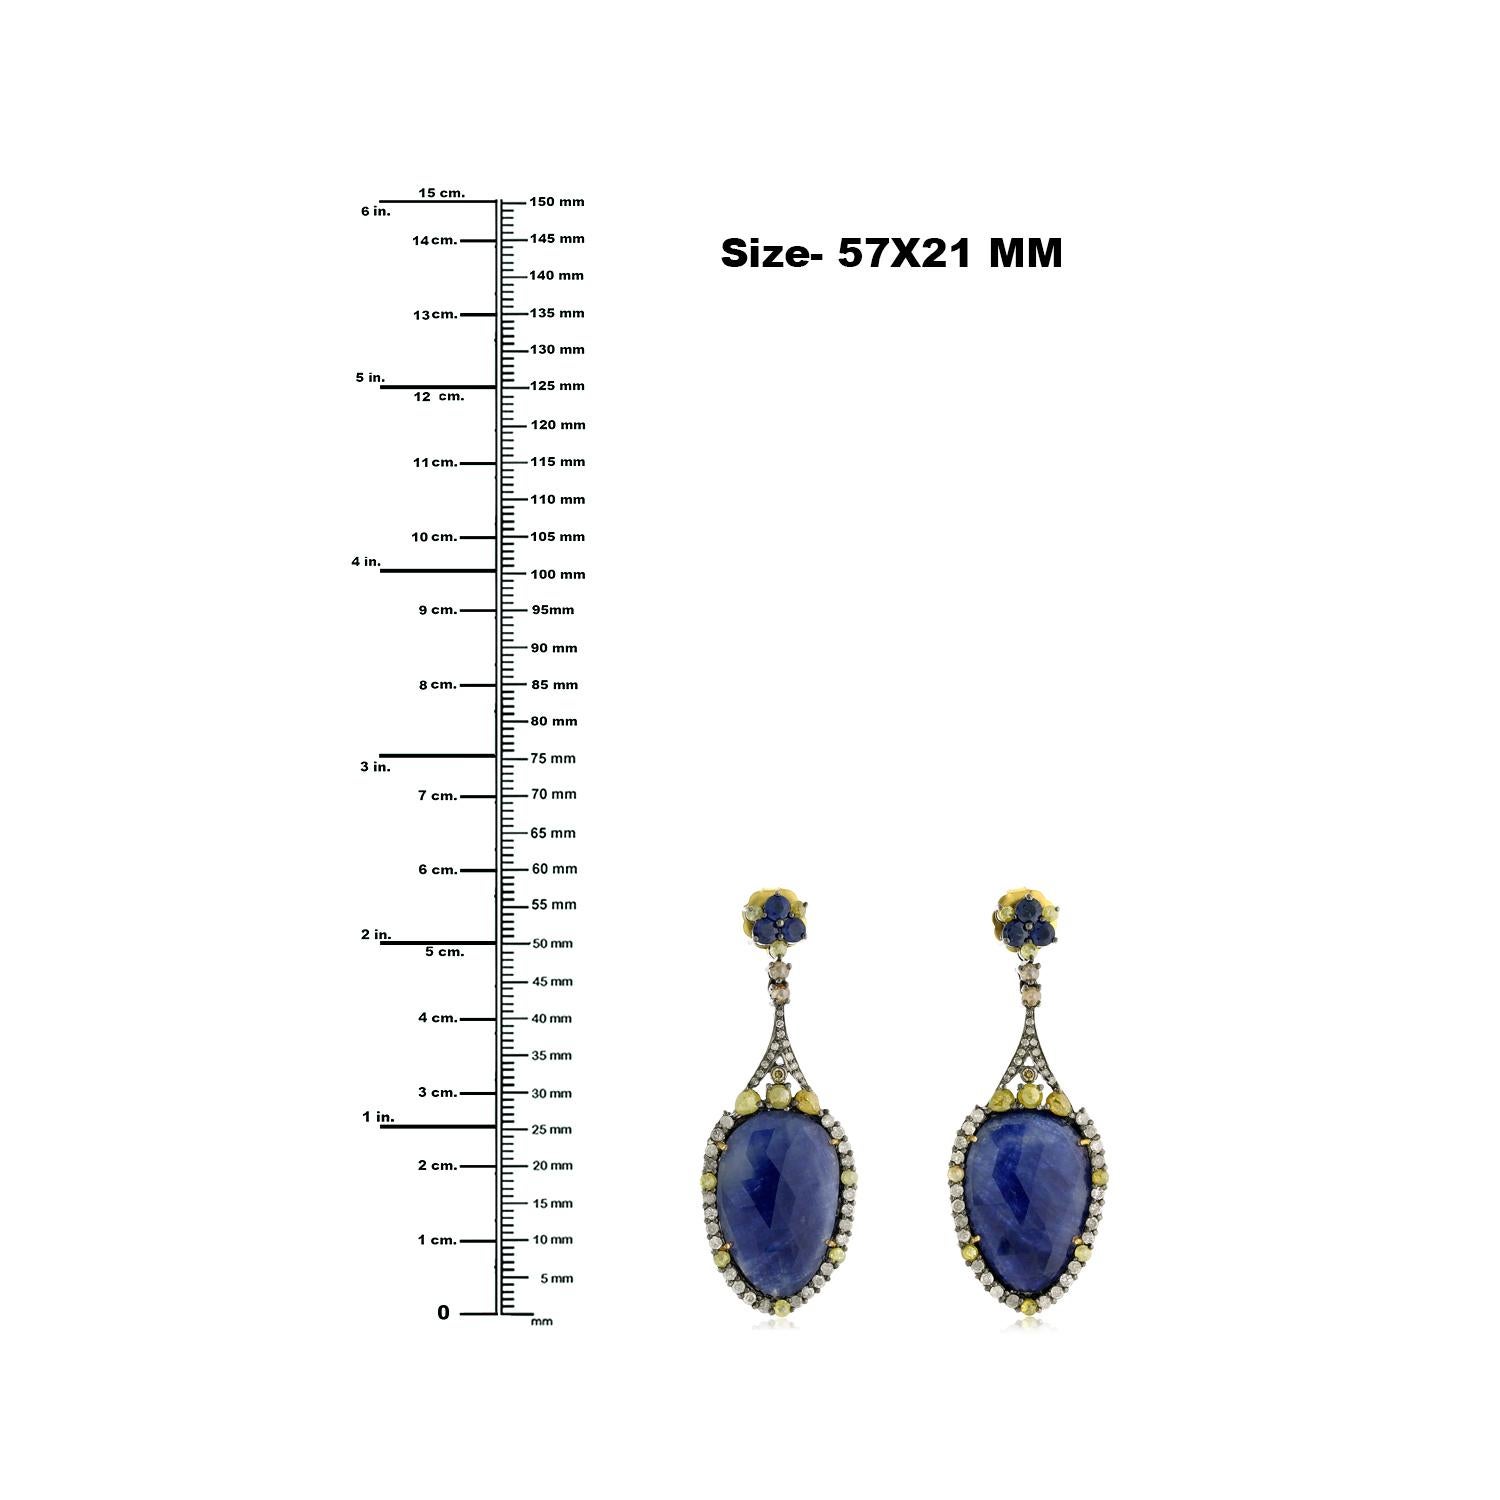 Mixed Cut Pear Shaped Sapphire Dangle Earring With Pave Diamonds Made In 18k Gold & Silver For Sale